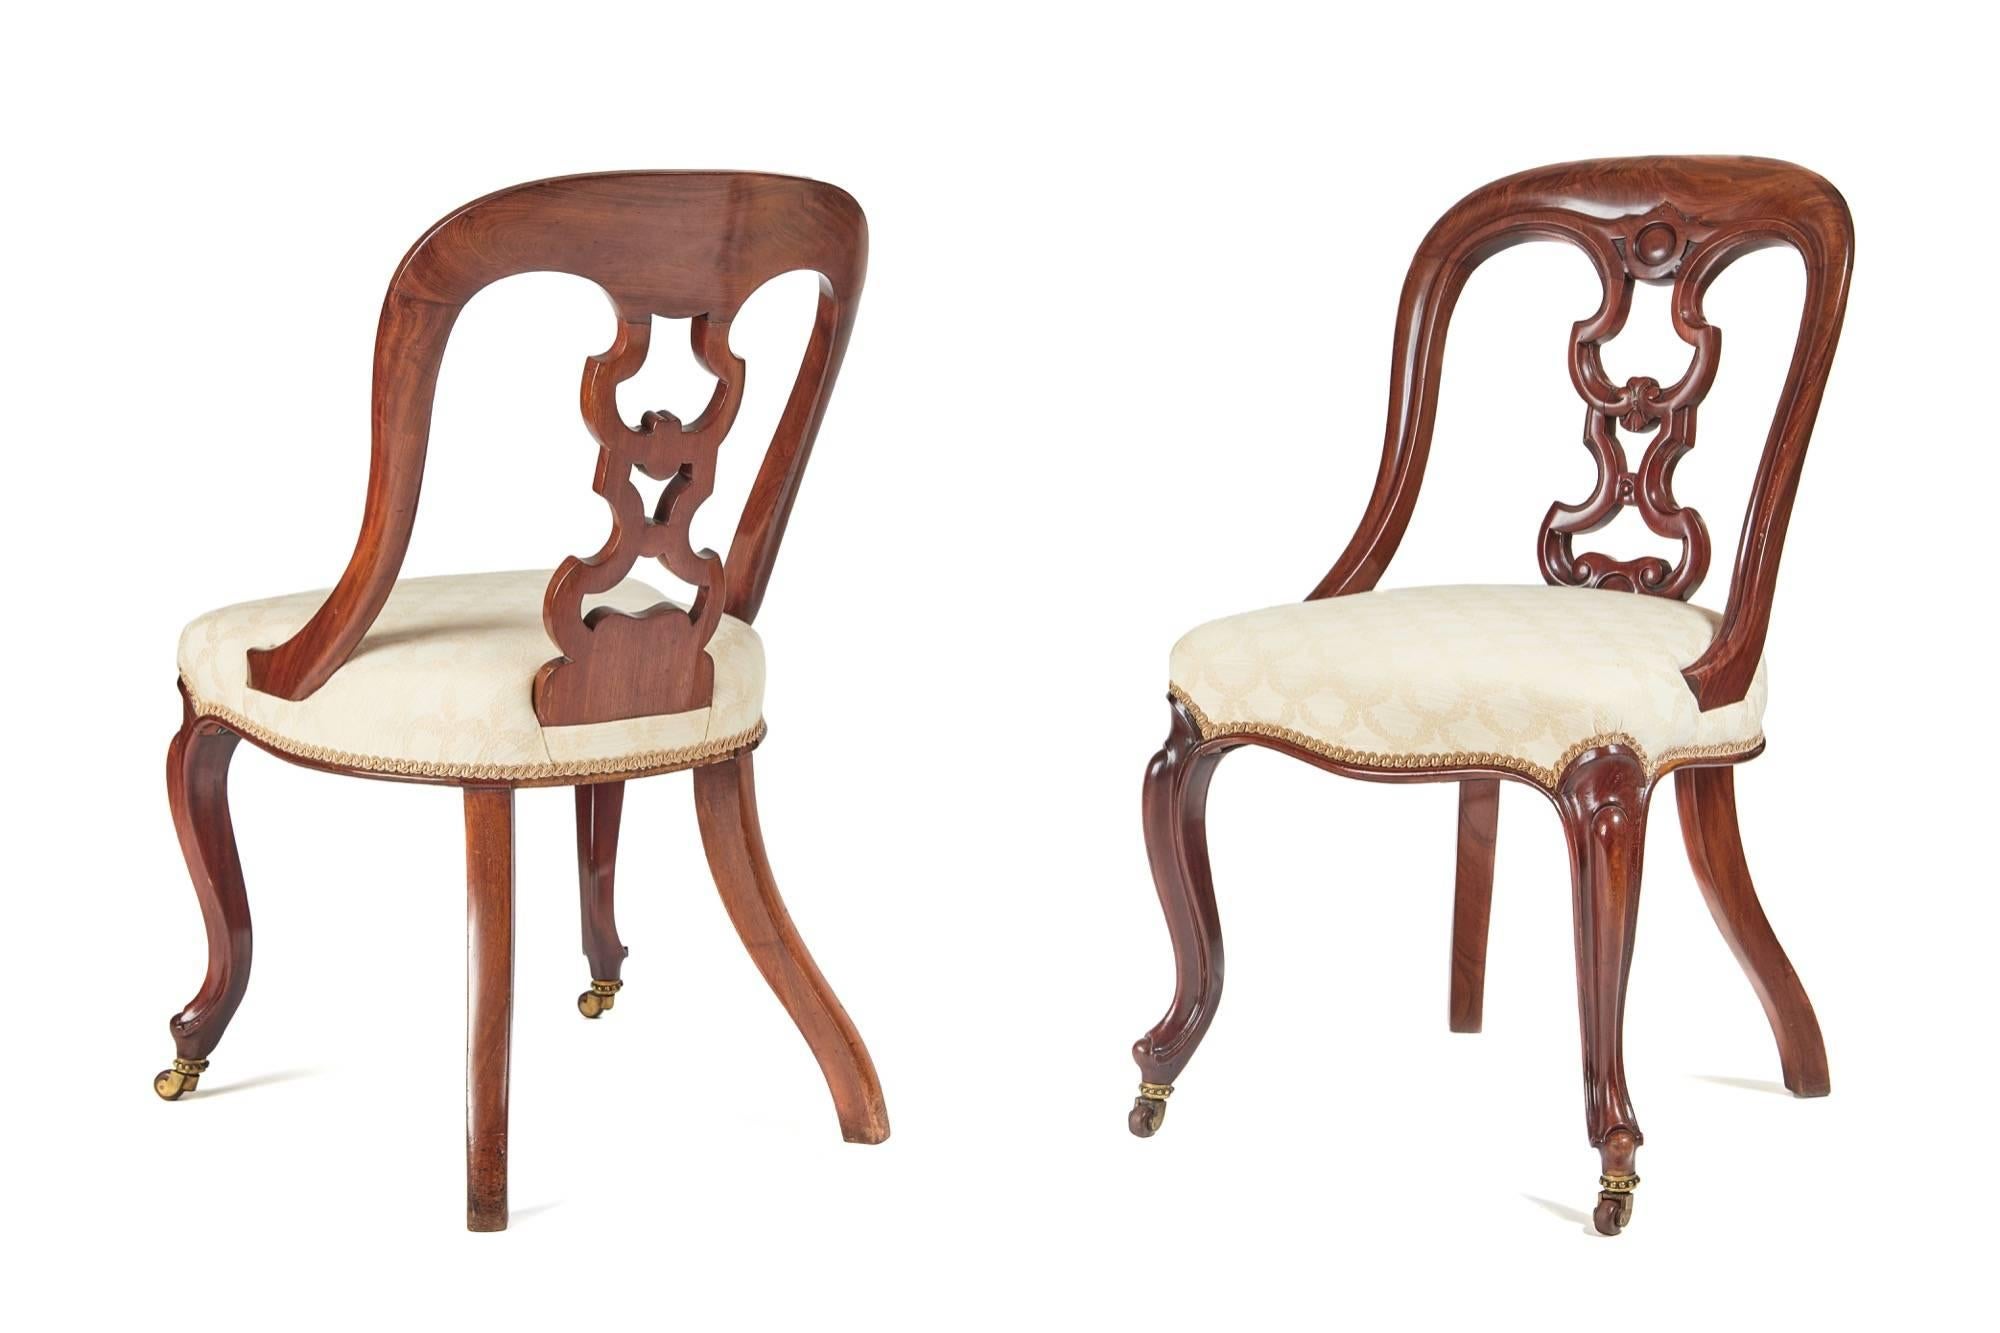 Set of four quality mahogany dining chairs, lovely shaped chair with a rounded back, attractive carved splat, standing on lovely shaped cabriole legs to the front outswept back legs, original castors
Newly re-upholstered
Lovely color and